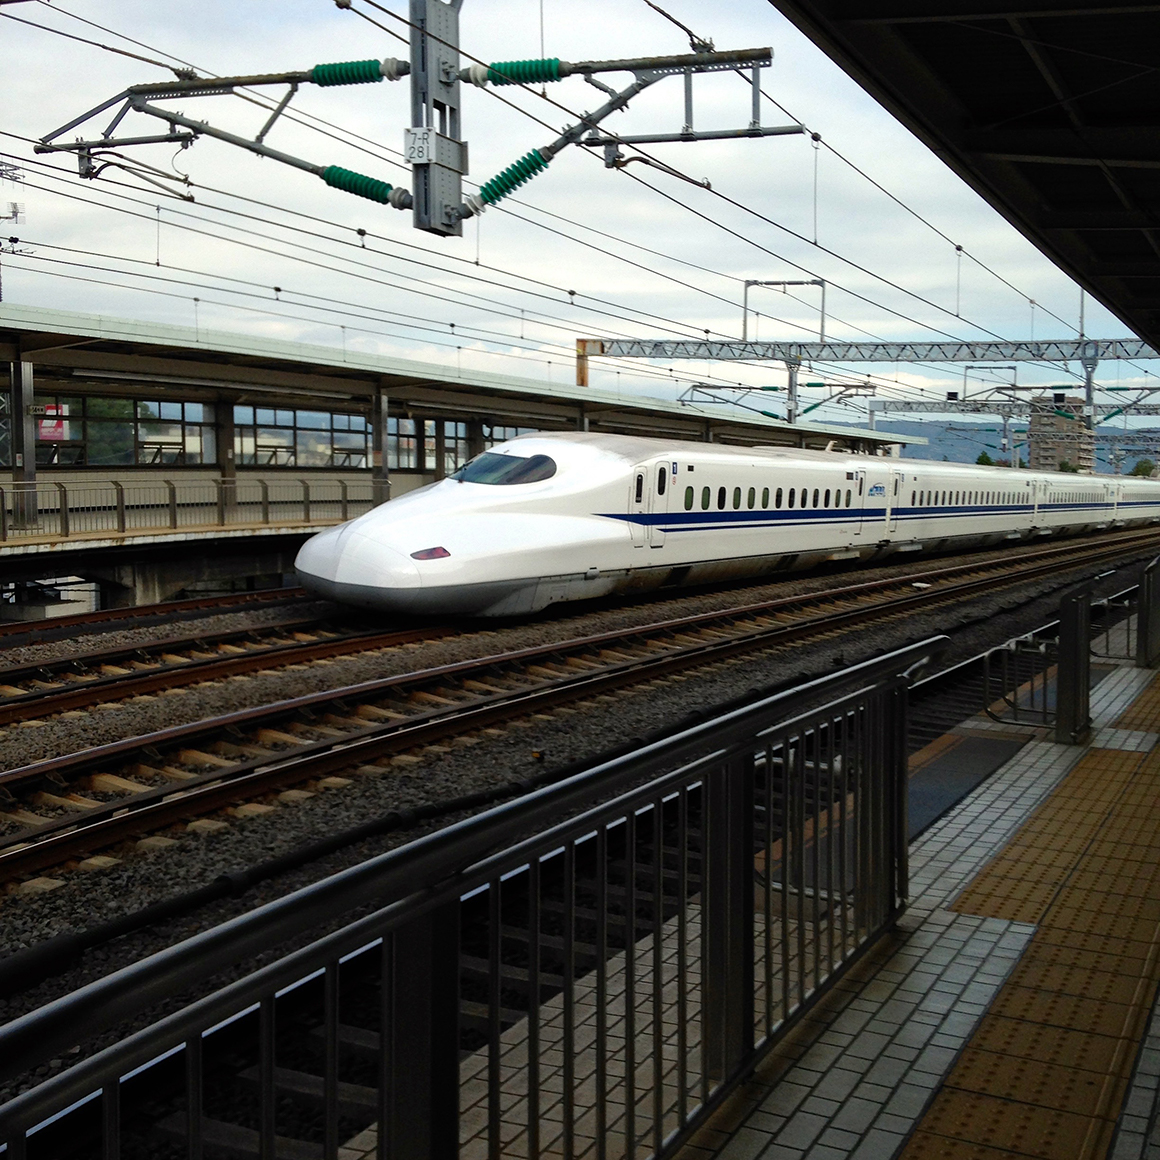 This is an image of a high speed train pulling into a train station.